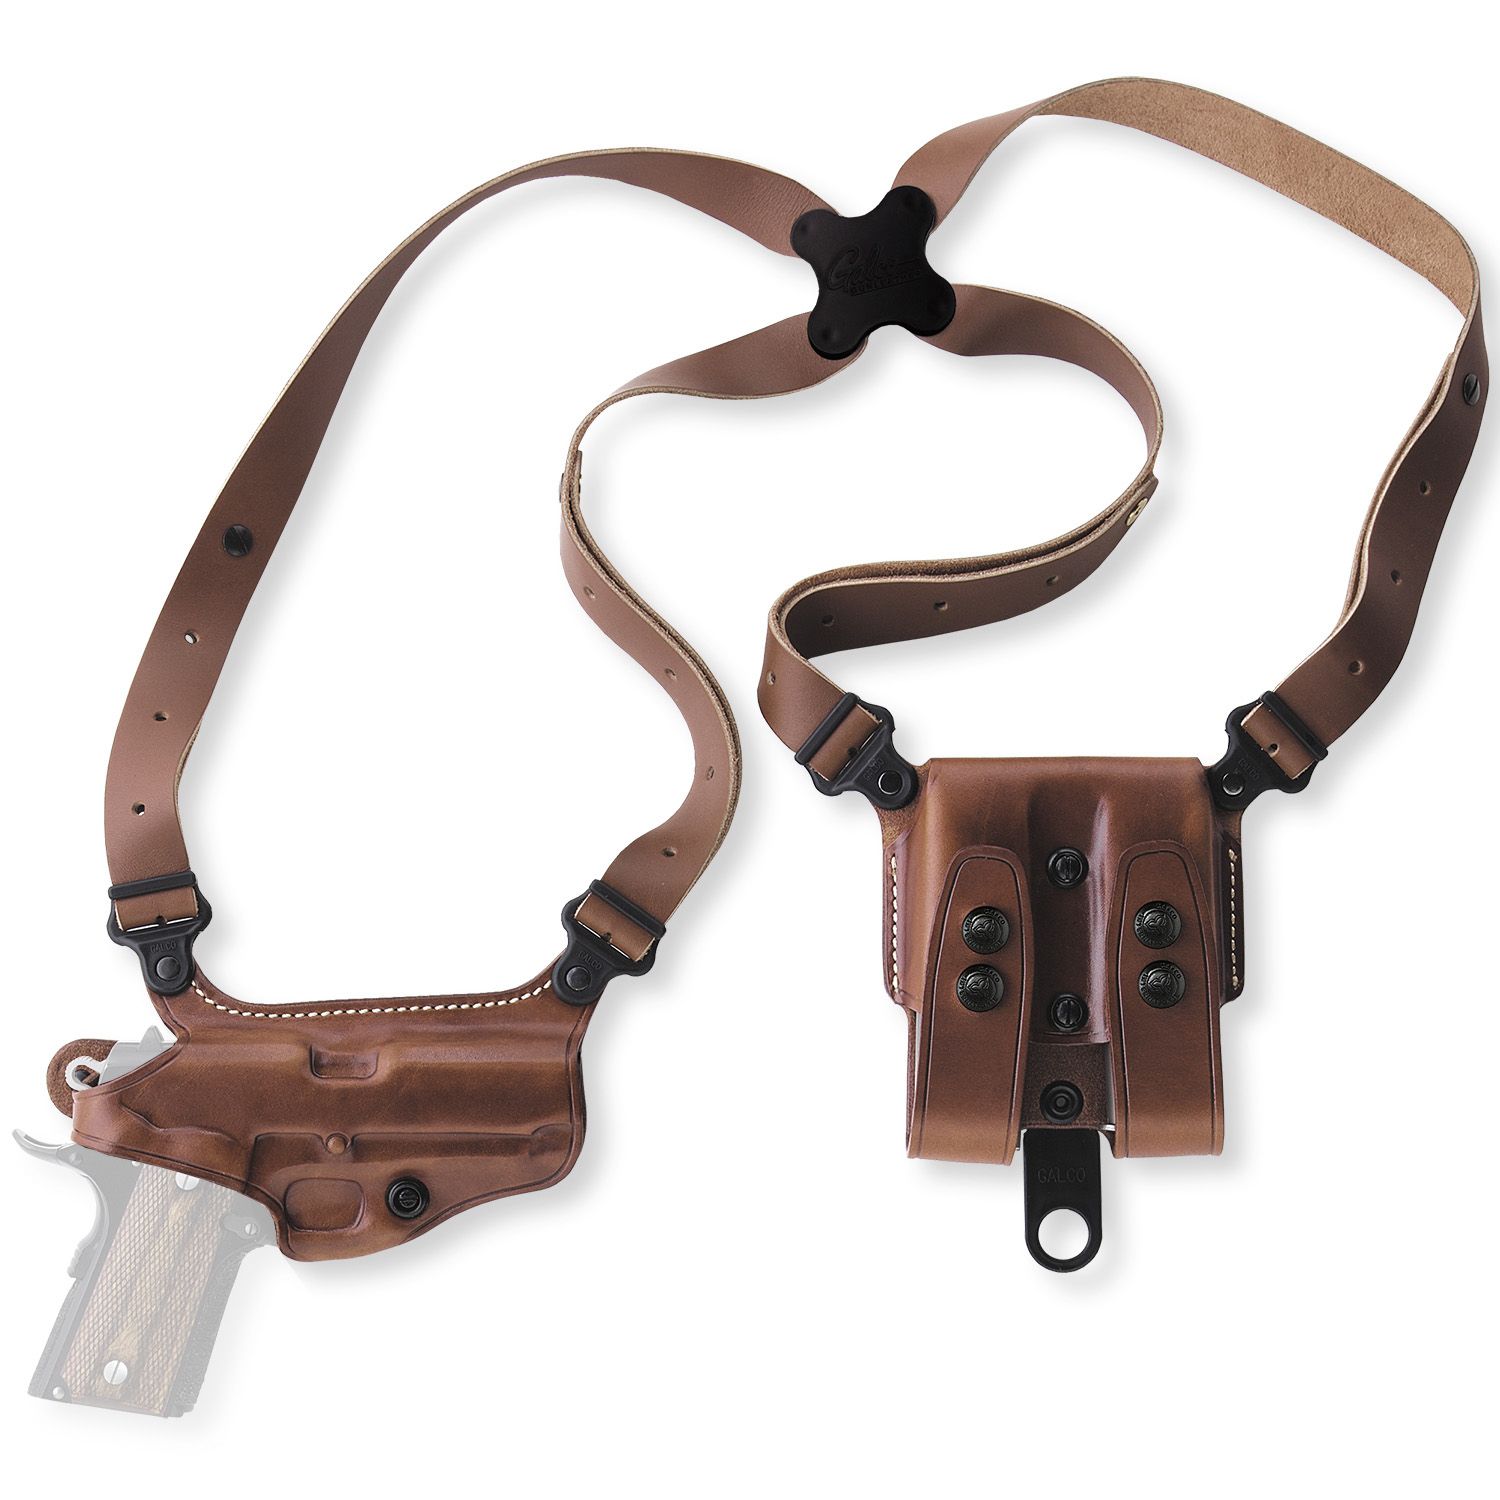 Galco Miami Classic Shoulder Handgun System Leather Holster Left Hand : MC213